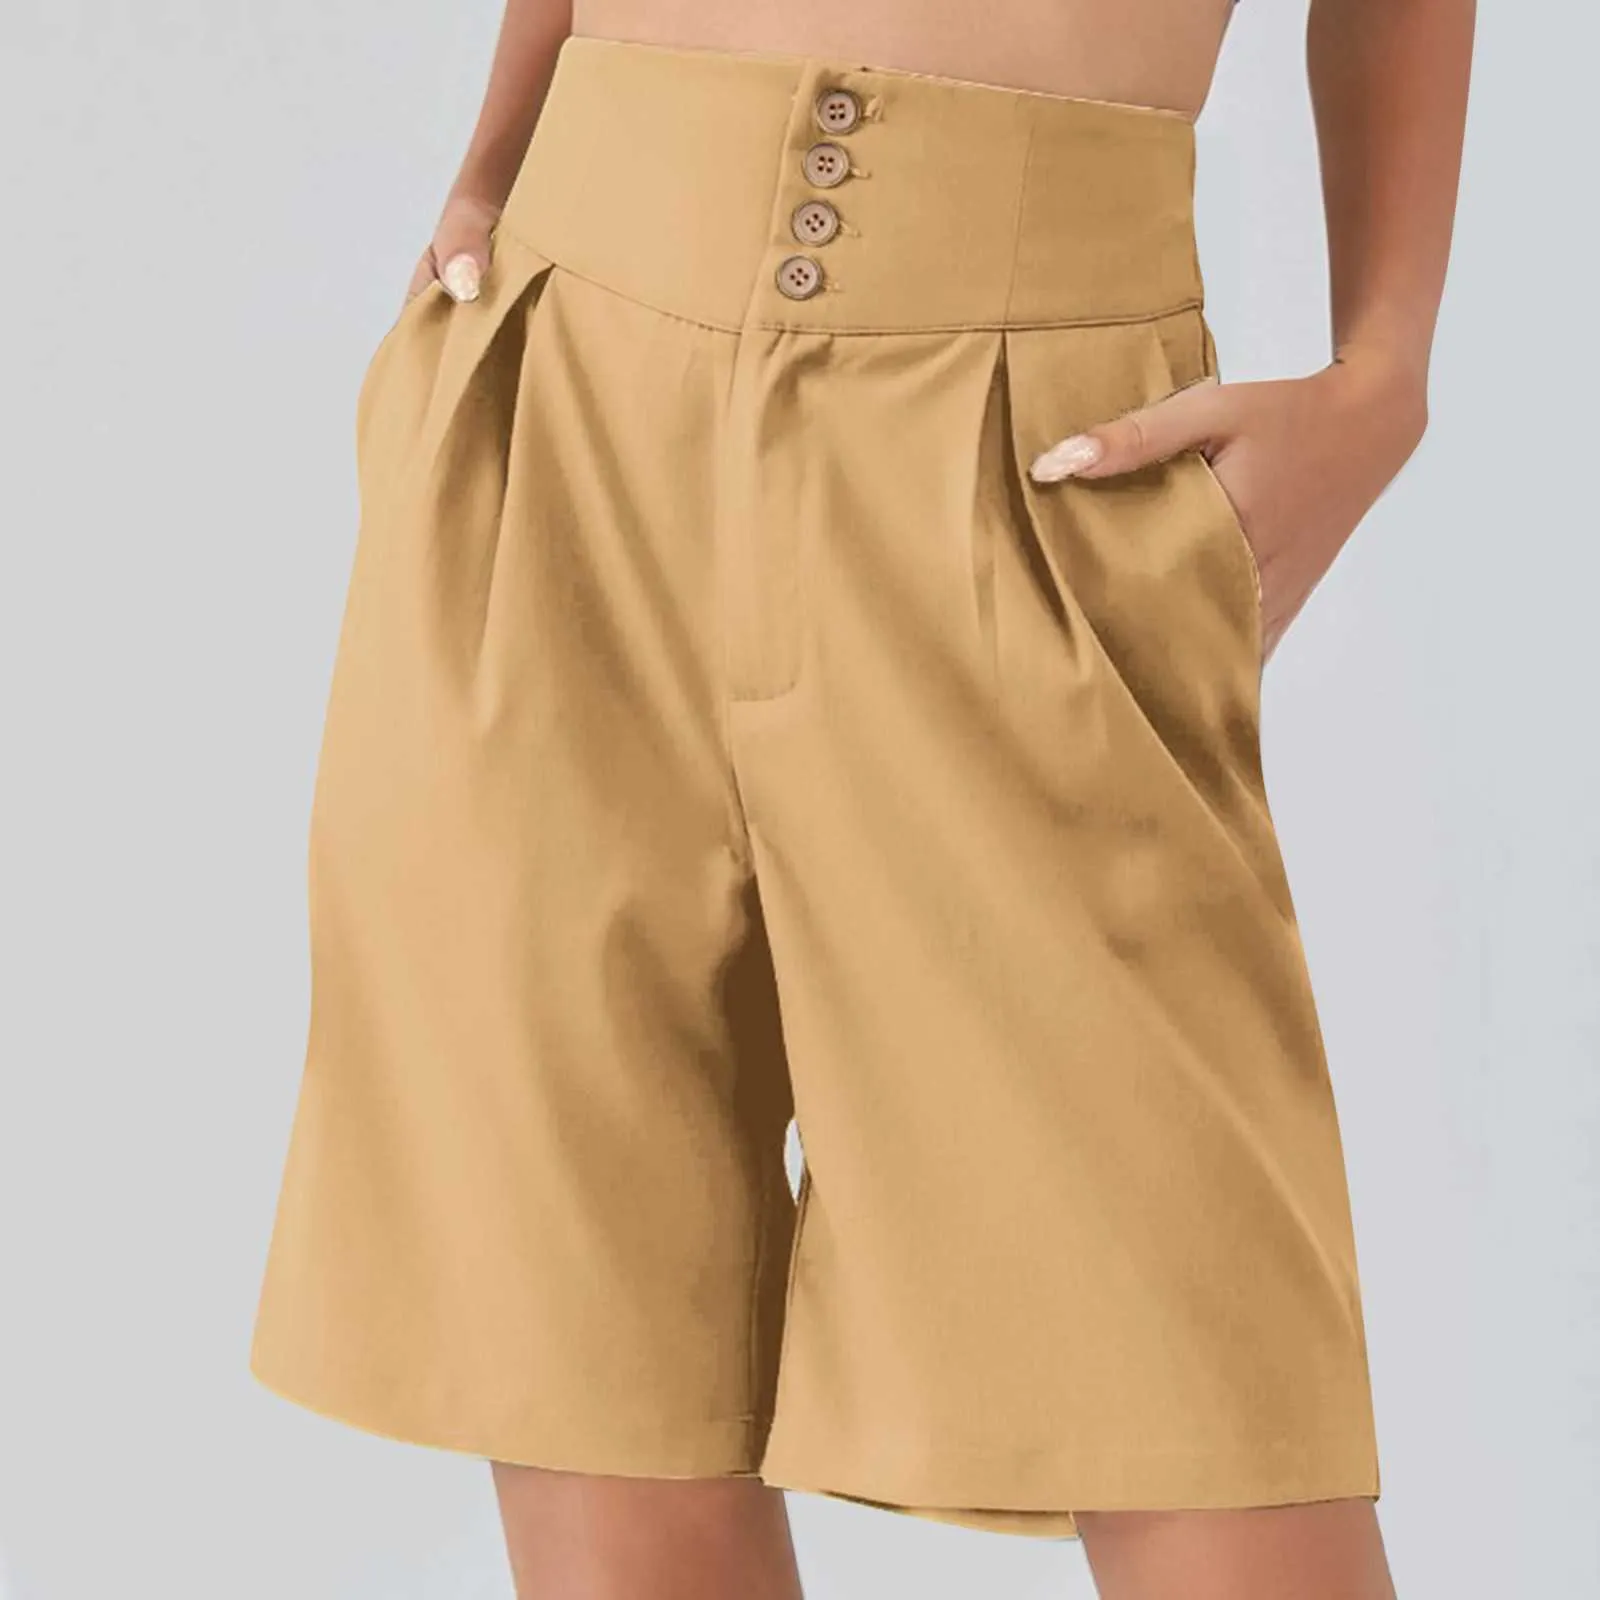 Women's Shorts Casual high waisted buttons summer solid color shorts women's loose fitting street clothing Pantalones tight corset P230606